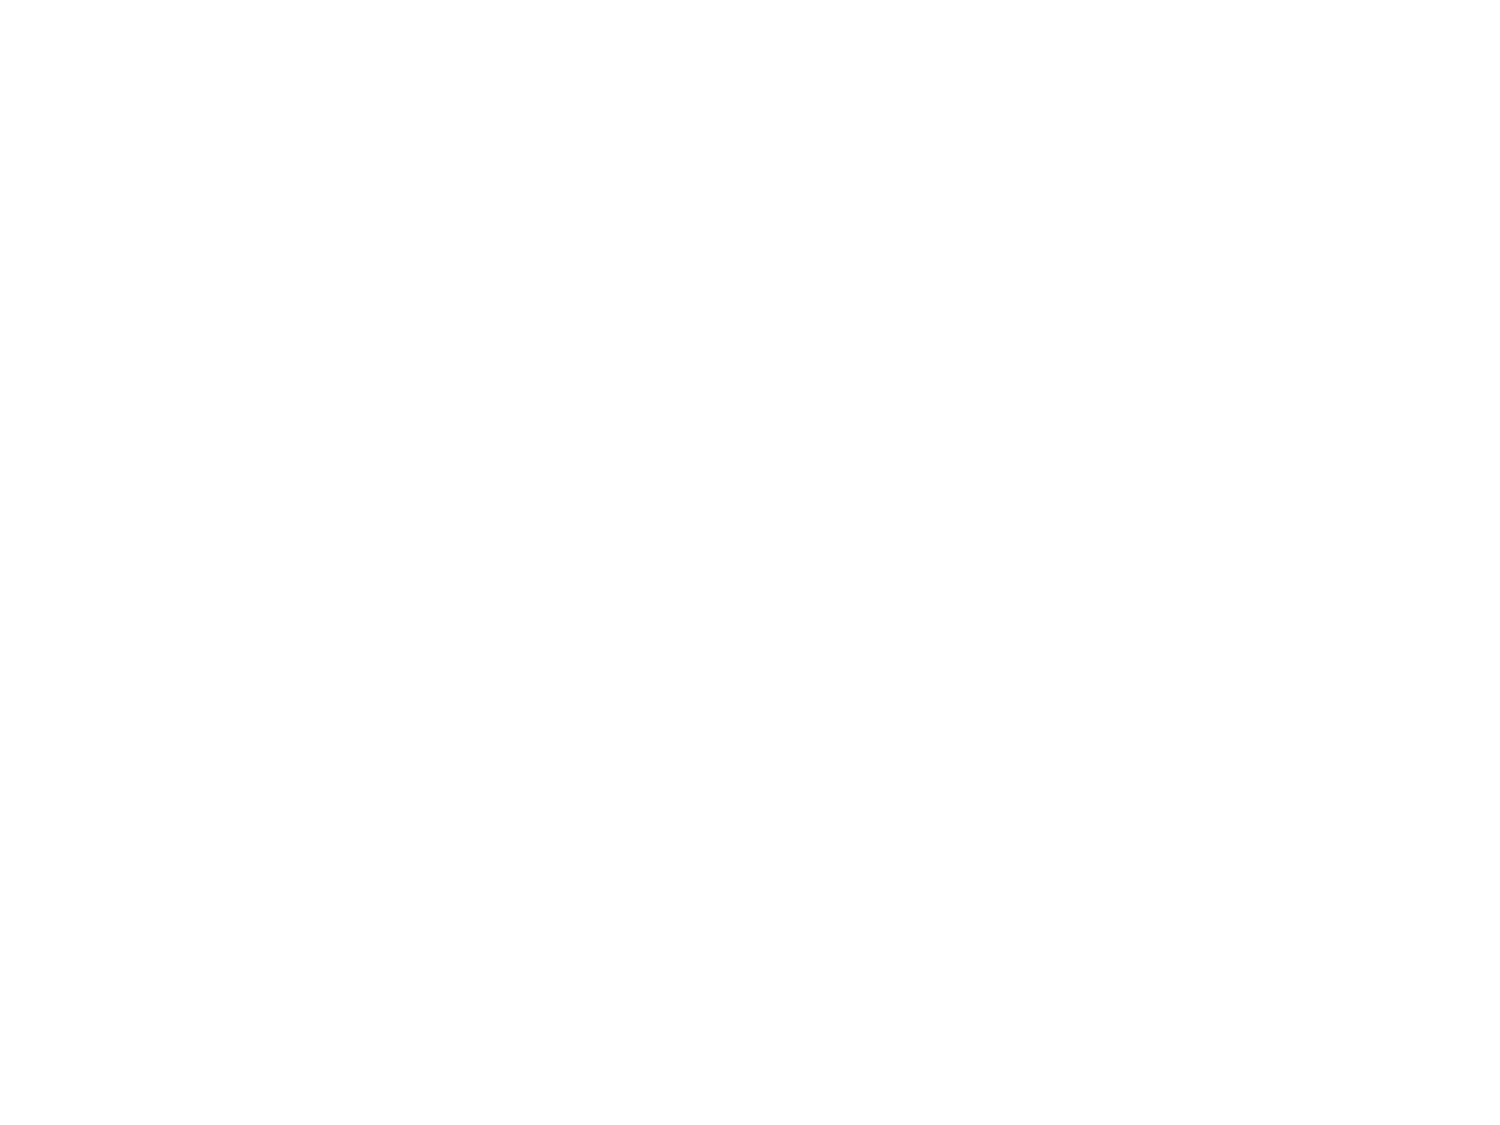 Like Brothers Pictures